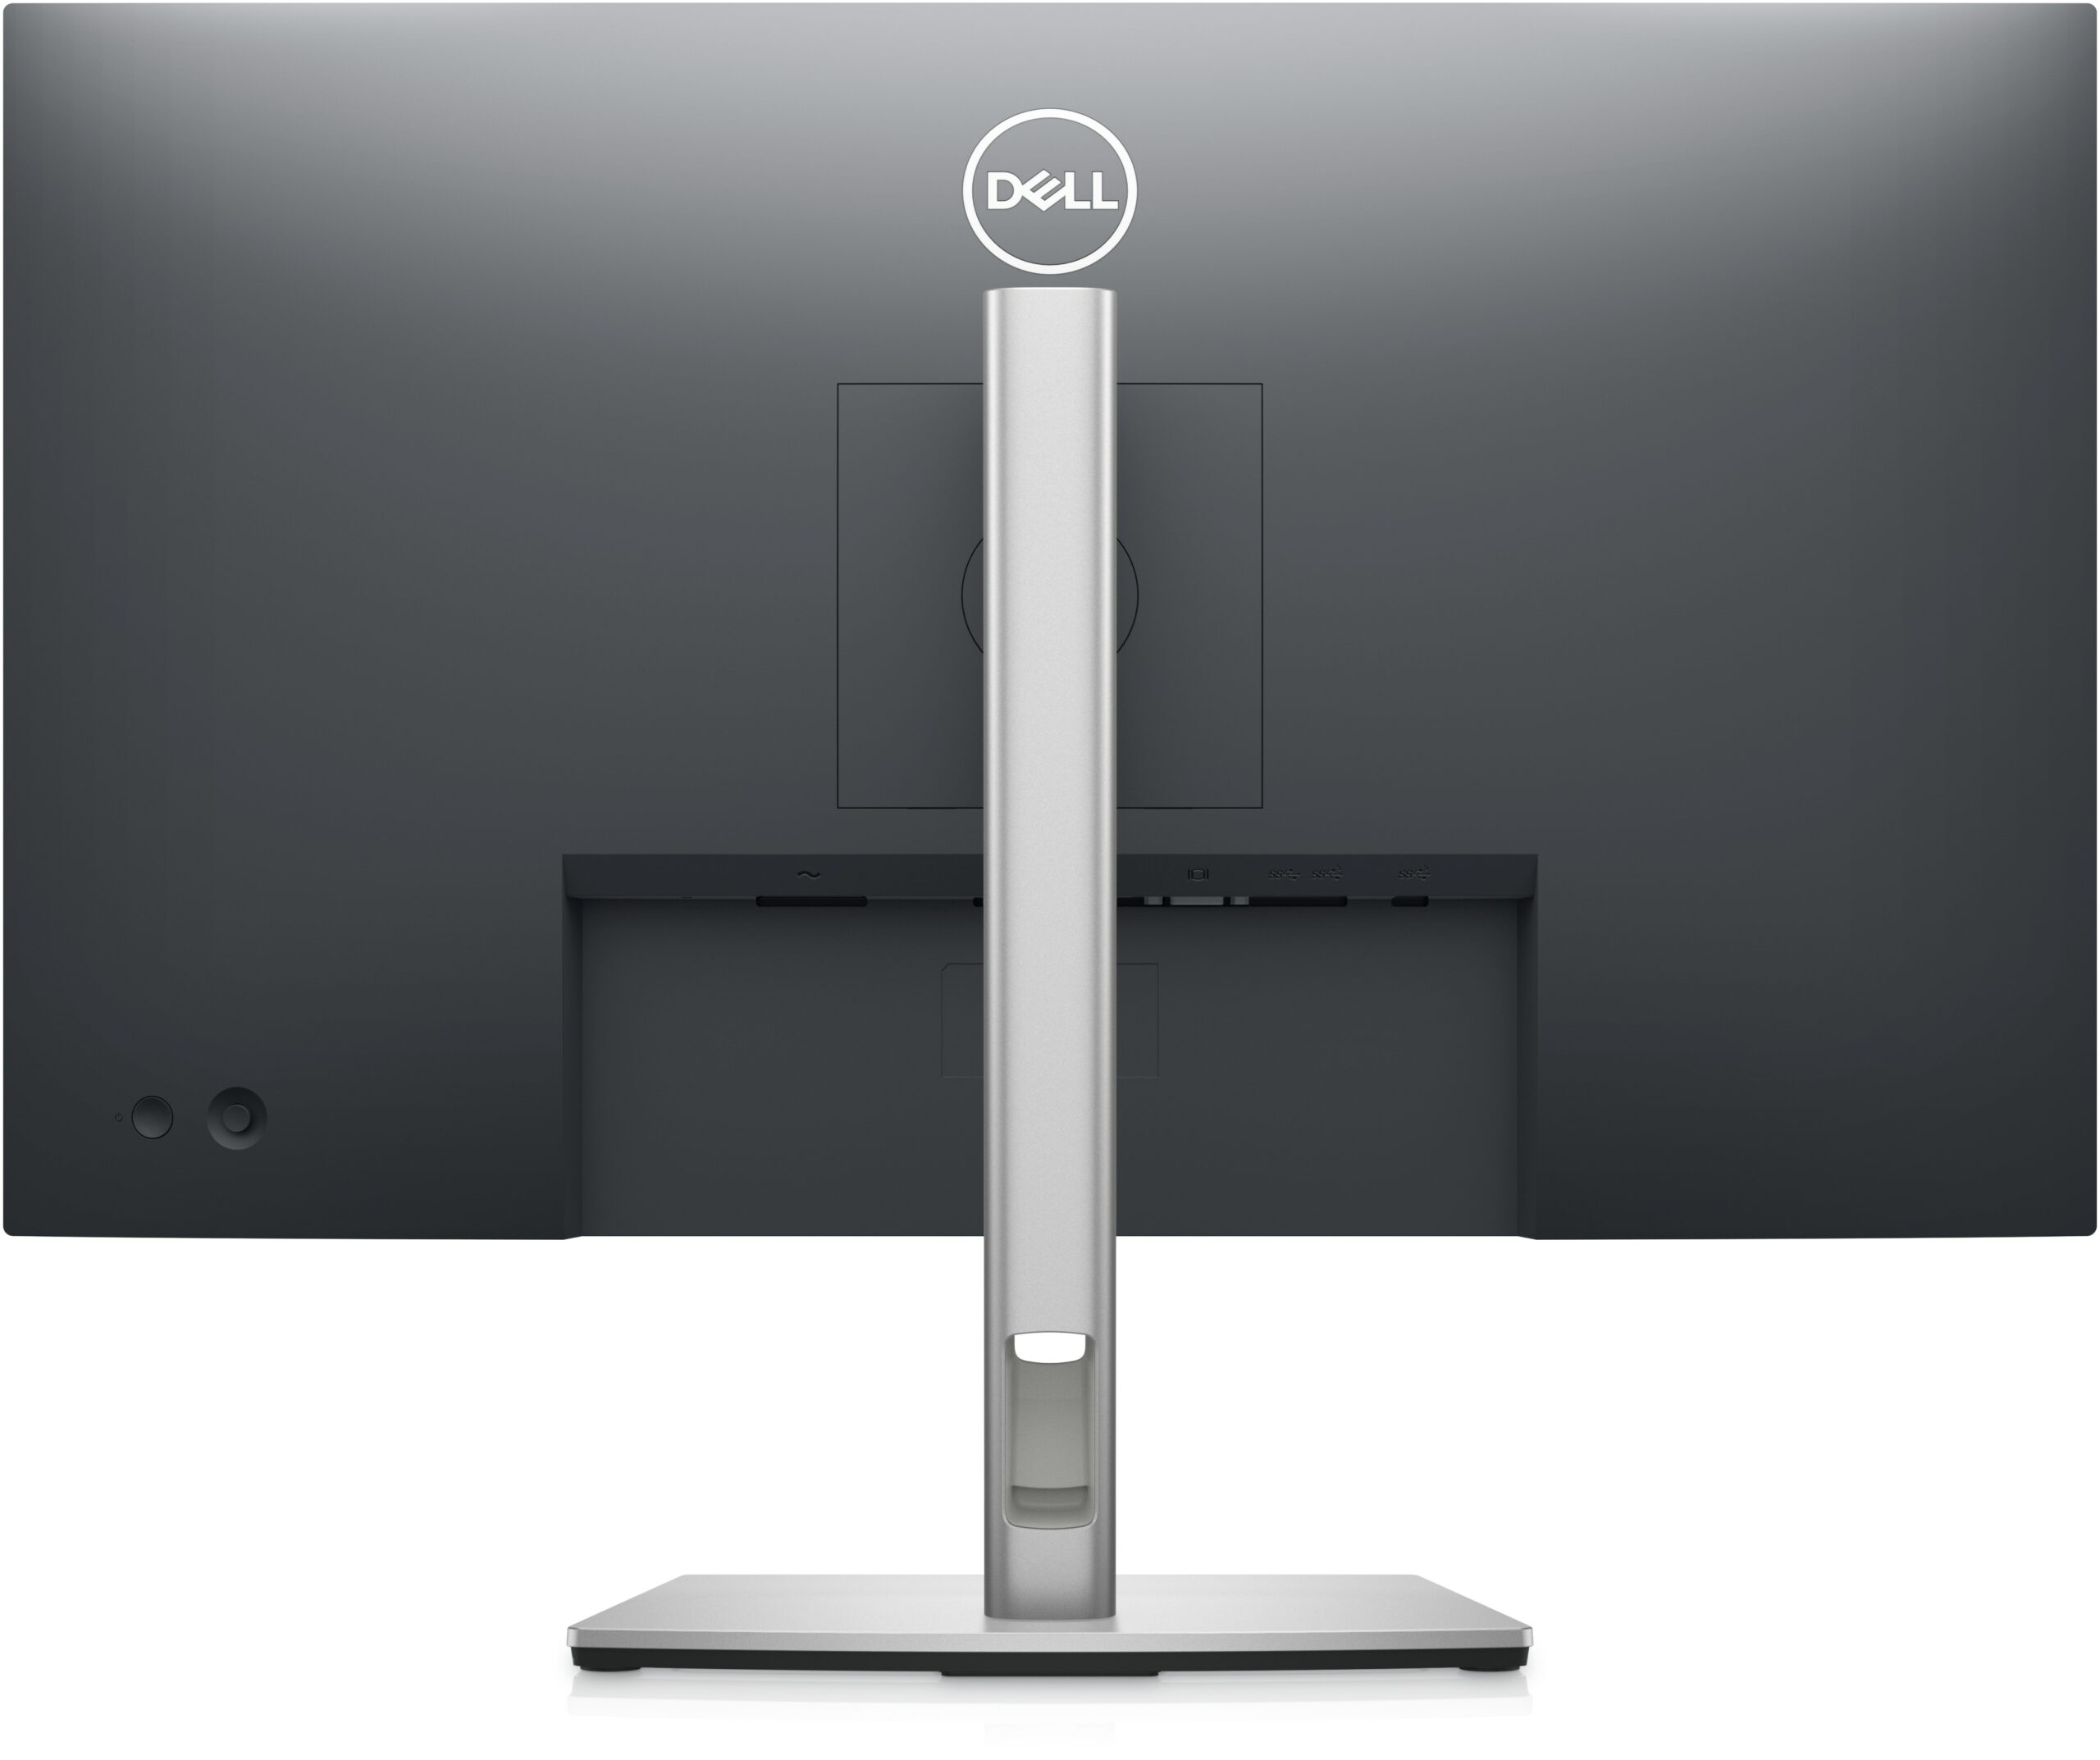 Monitor Dell 27 Inch Home  Office Ips Full Hd 1920 X 1080 Wide 300 Cdmp 5 Ms Hdmi  Displayport P2722he Include Tv 600lei